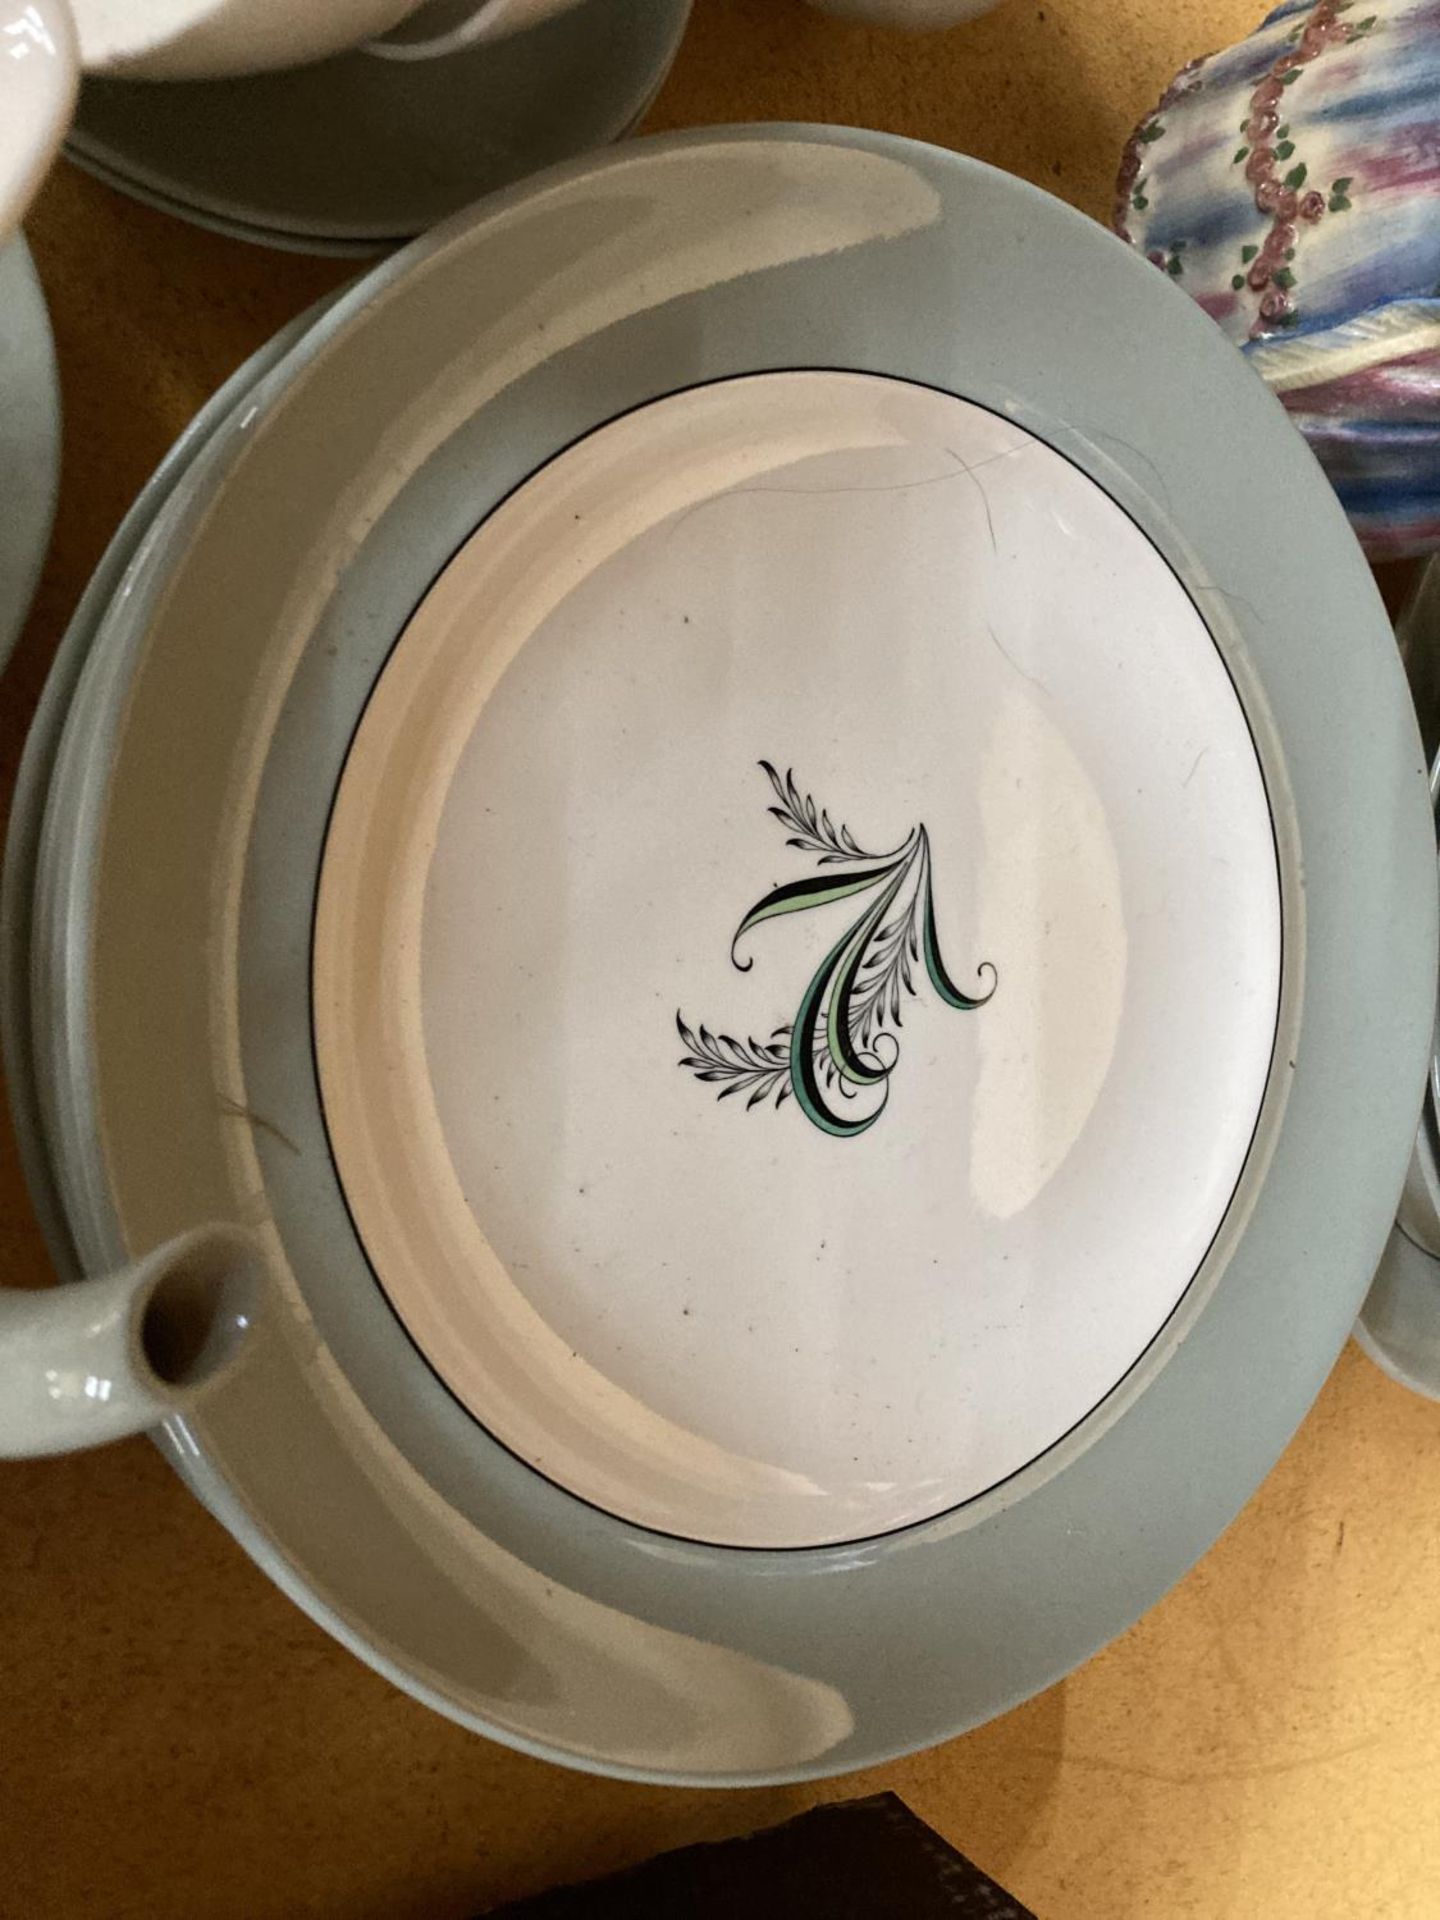 A QUANTITY OF COPELAND SPODE 'OLYMPUS' TO INCLUDE PLATES, A TEAPOT, CUPS, SAUCERS AND SAUCE BOAT - Image 2 of 5